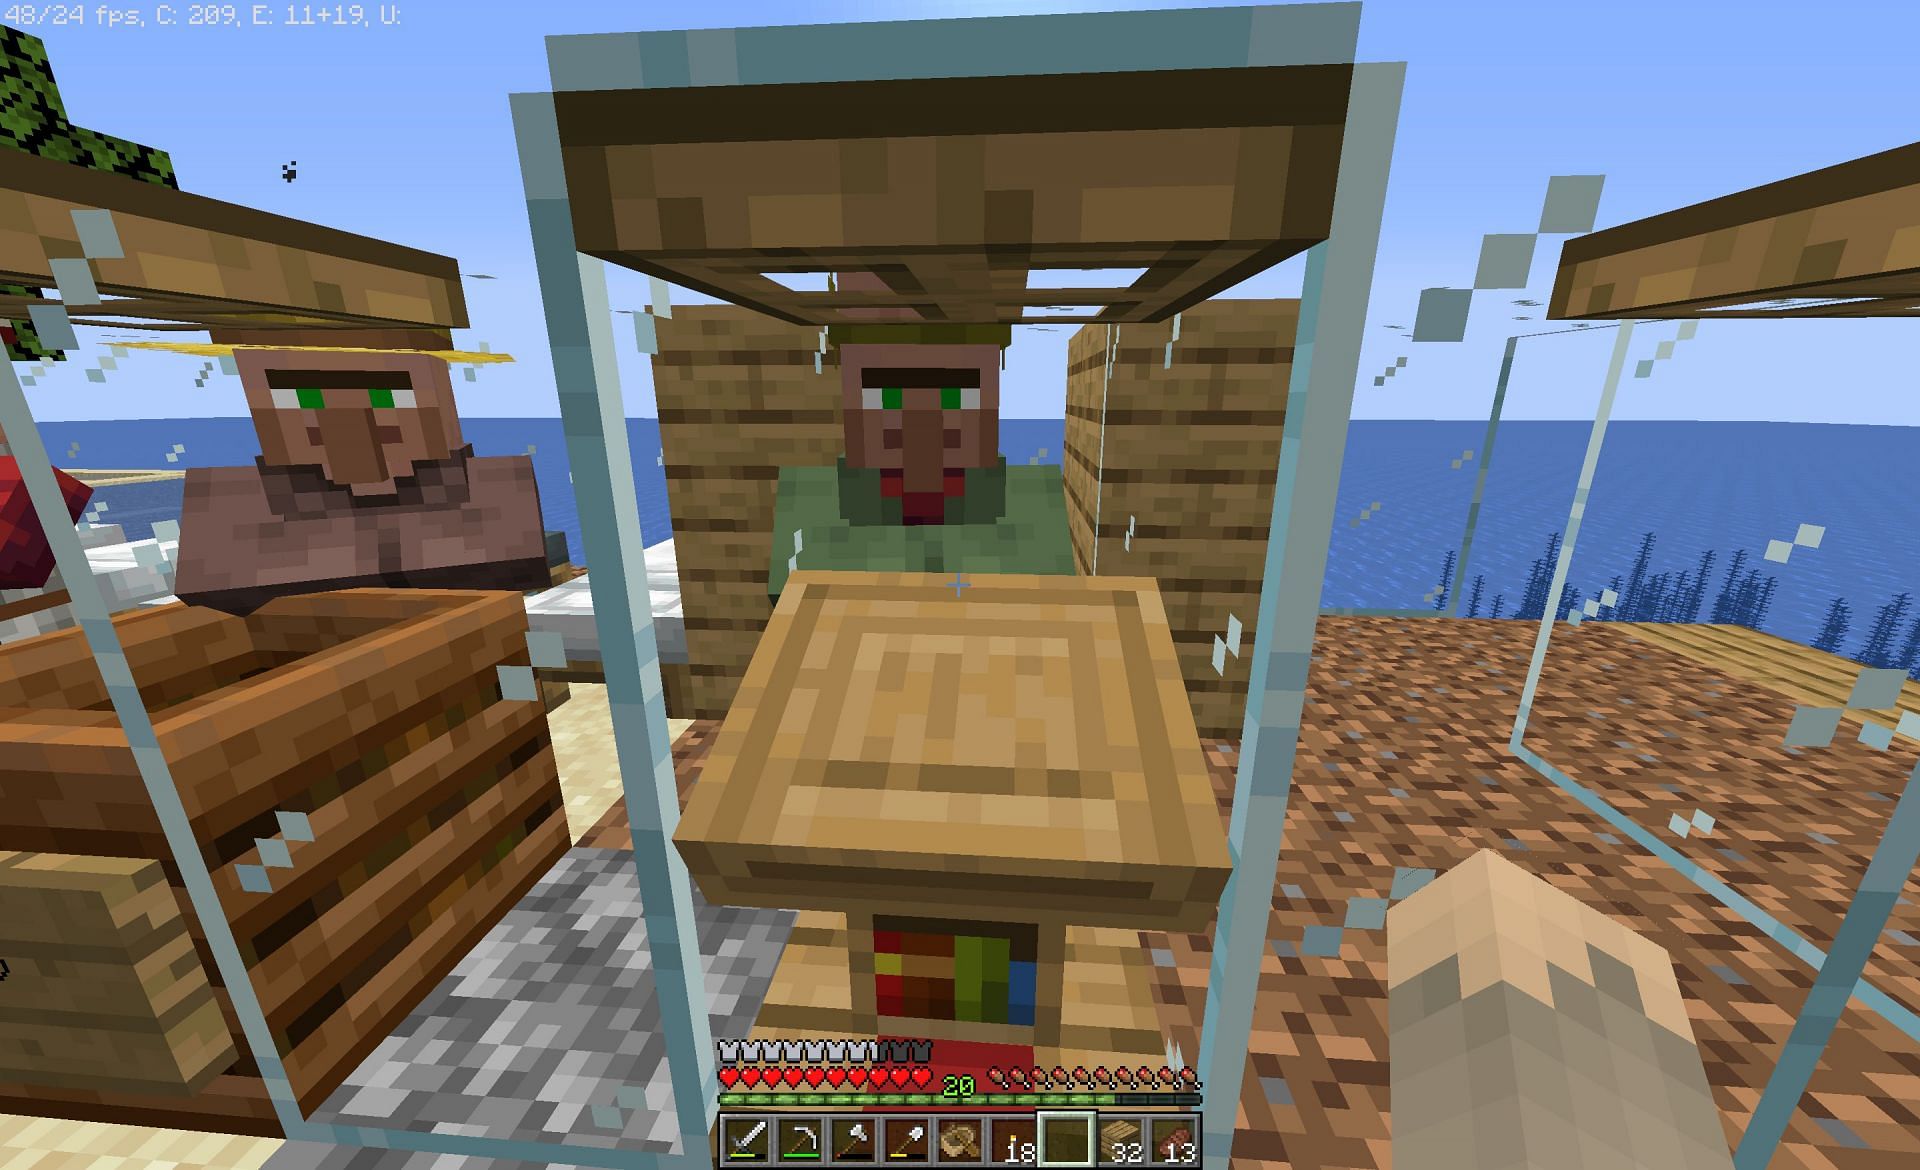 Villagers can produce XP (Image via Minecraft)